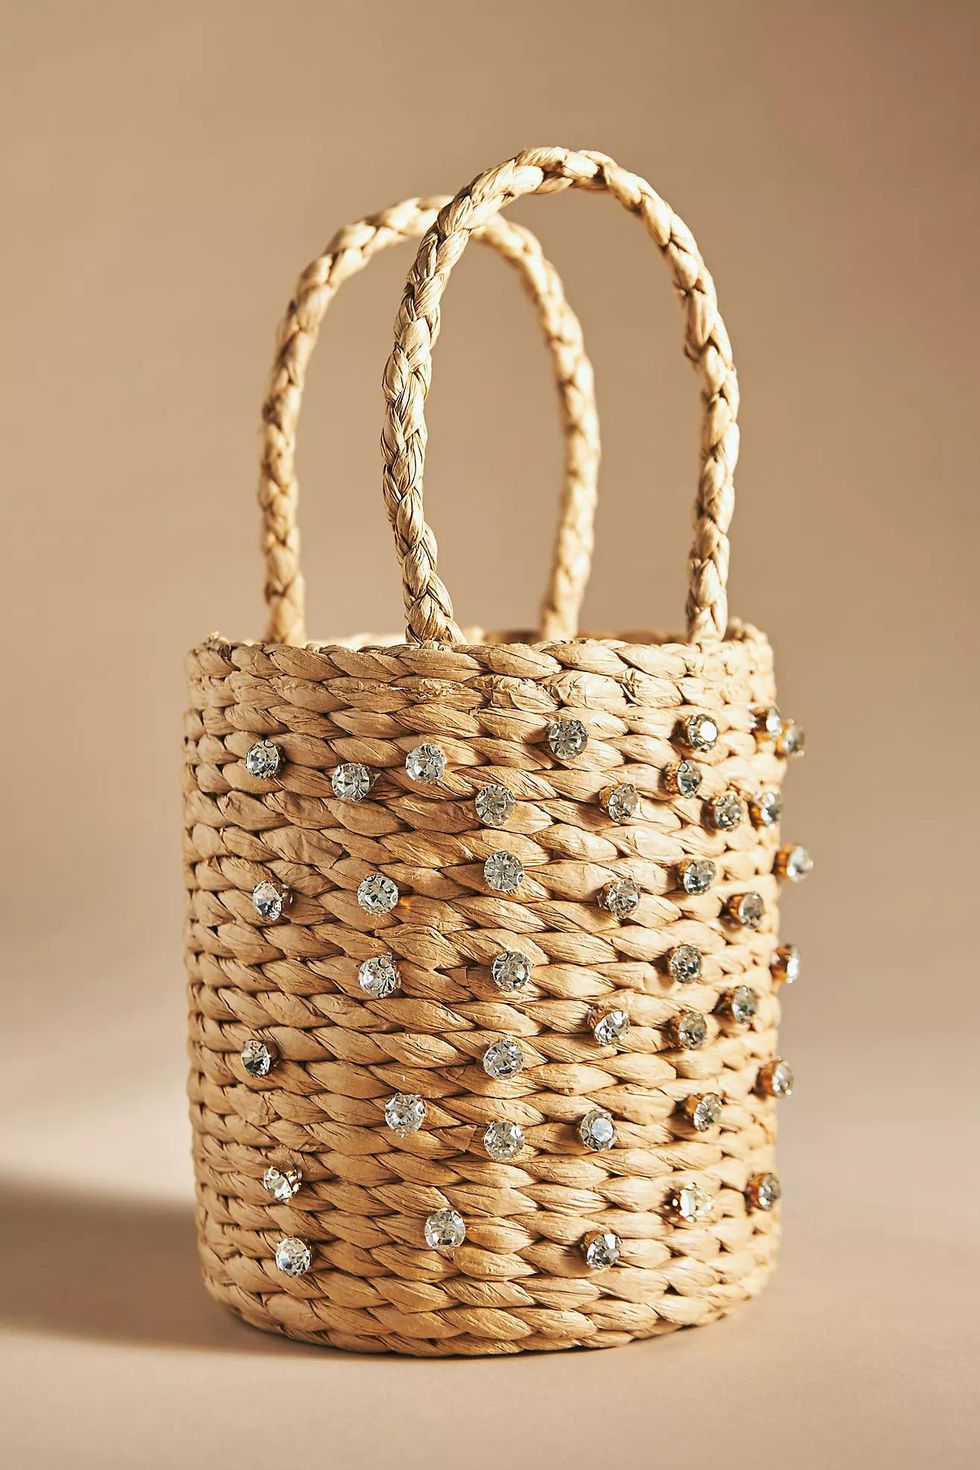 4 CUTEST STRAW BAGS FOR THE SUMMER - Styled by Eveliina